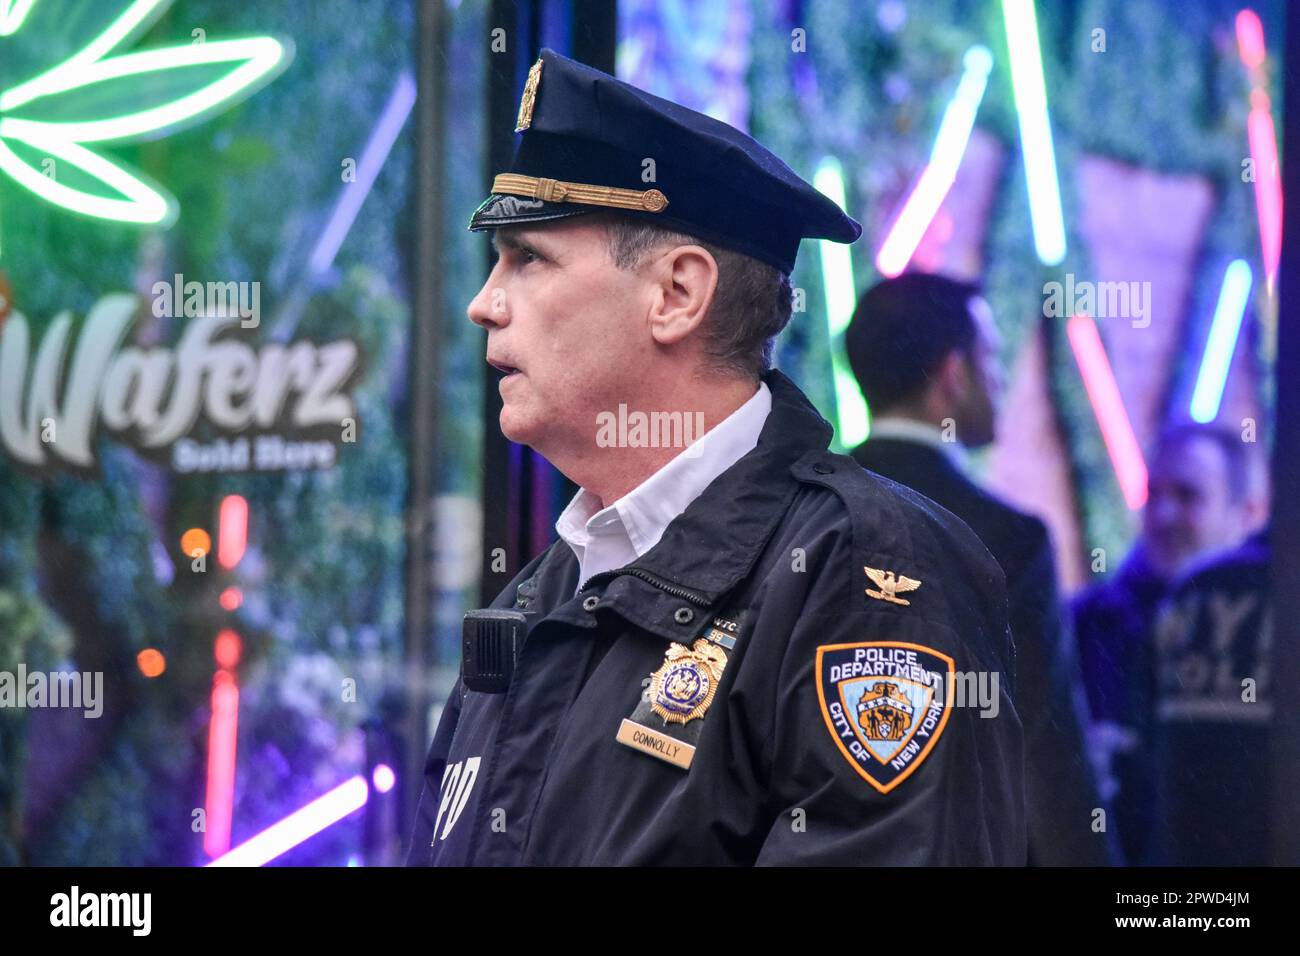 Manhattan, United States. 29th Apr, 2023. Police officer seen during the investigation. Police investigate the shooting incident. Shooting in Manhattan, New York, United States on April 29, 2023. At 17:43 Saturday evening one person was shot in the hip and shoulder near the area of 9th Avenue and West 46th Street. According to the New York City Police Department, the person shot is in stable condition. No suspects are captured at this time. (Photo by Kyle Mazza/SOPA Images/Sipa USA) Credit: Sipa USA/Alamy Live News Stock Photo